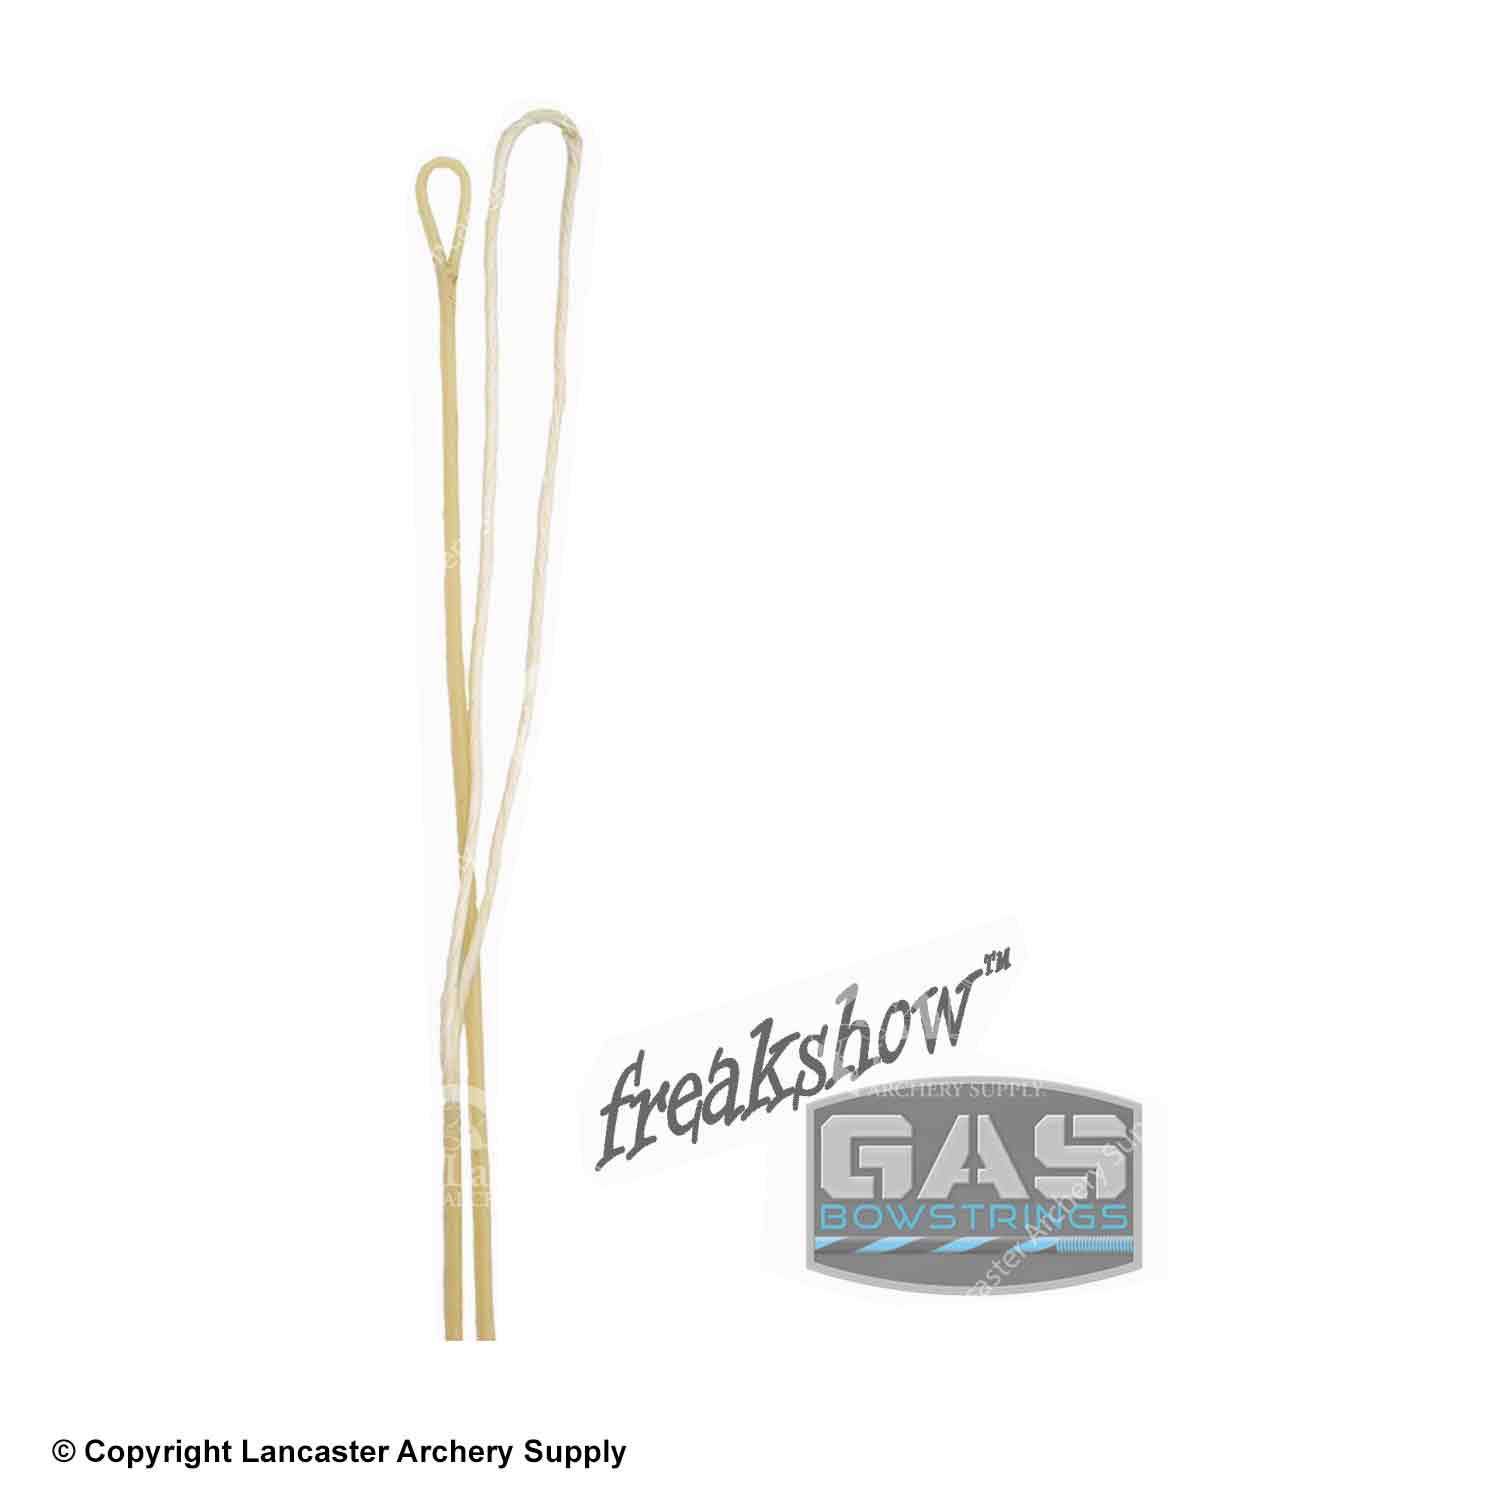 GAS Bowstrings Freakshow Two Cam String